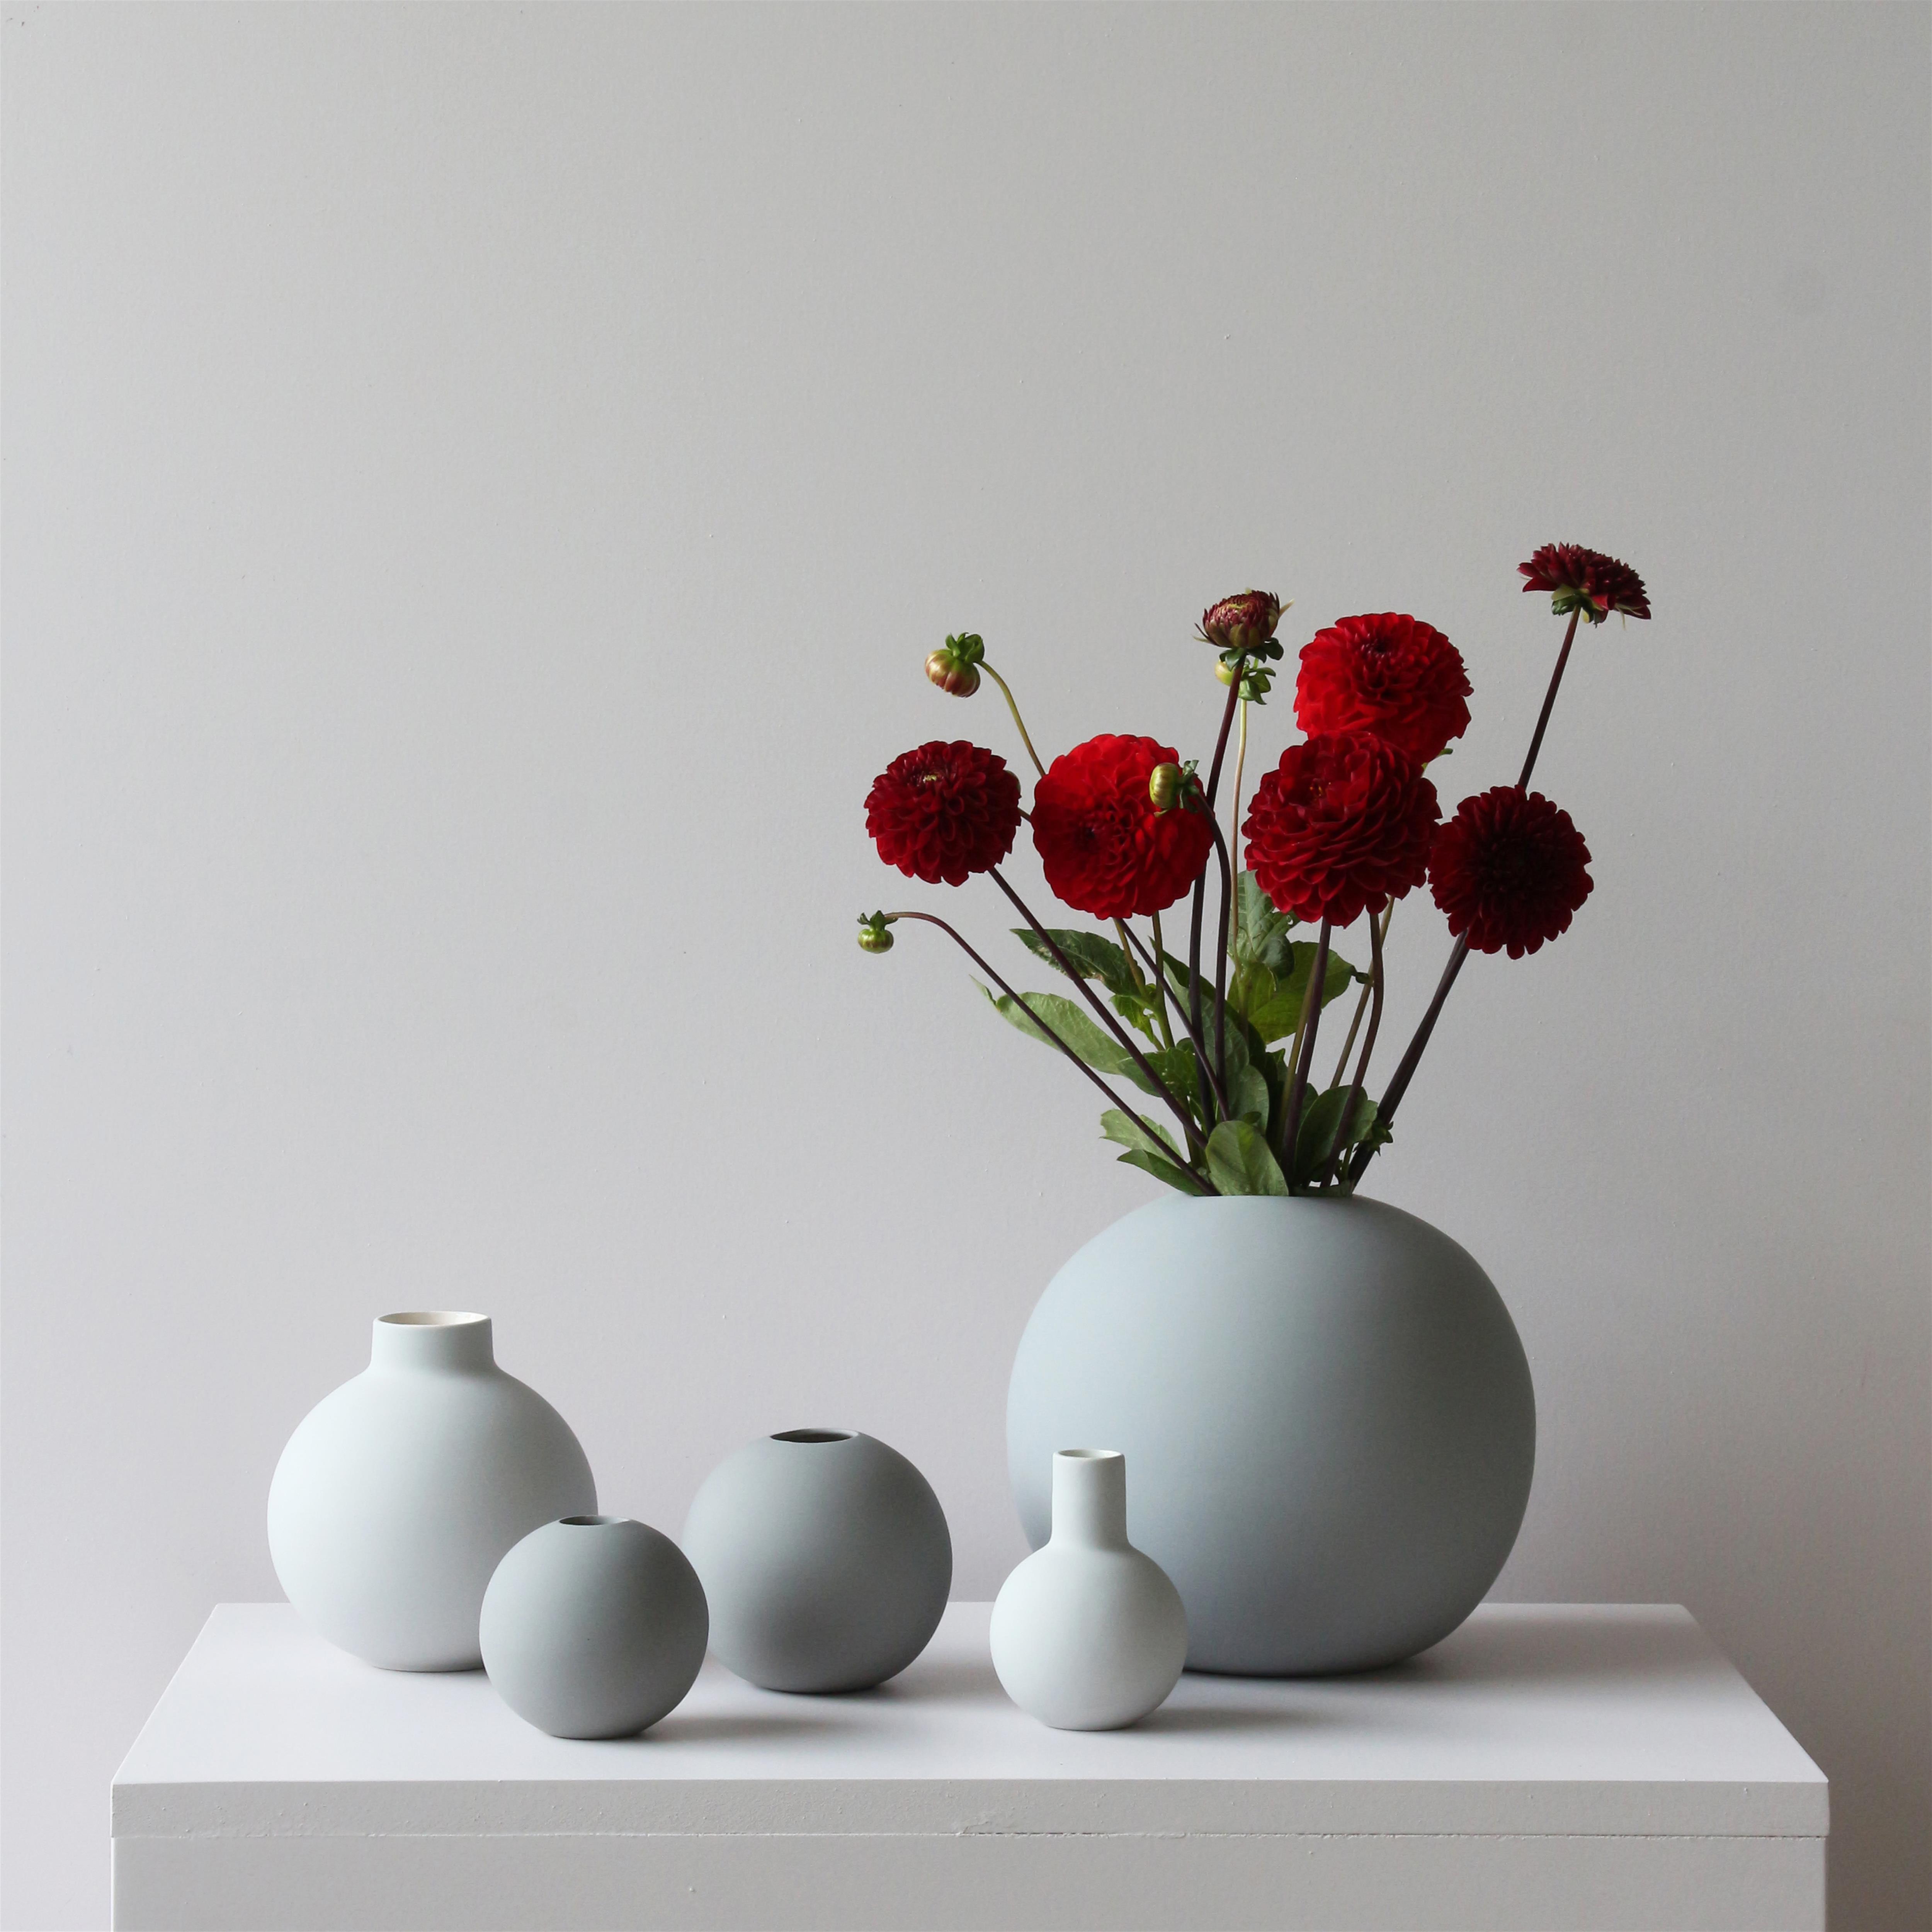 Ball vase grey from Cooee Design - NordicNest.com